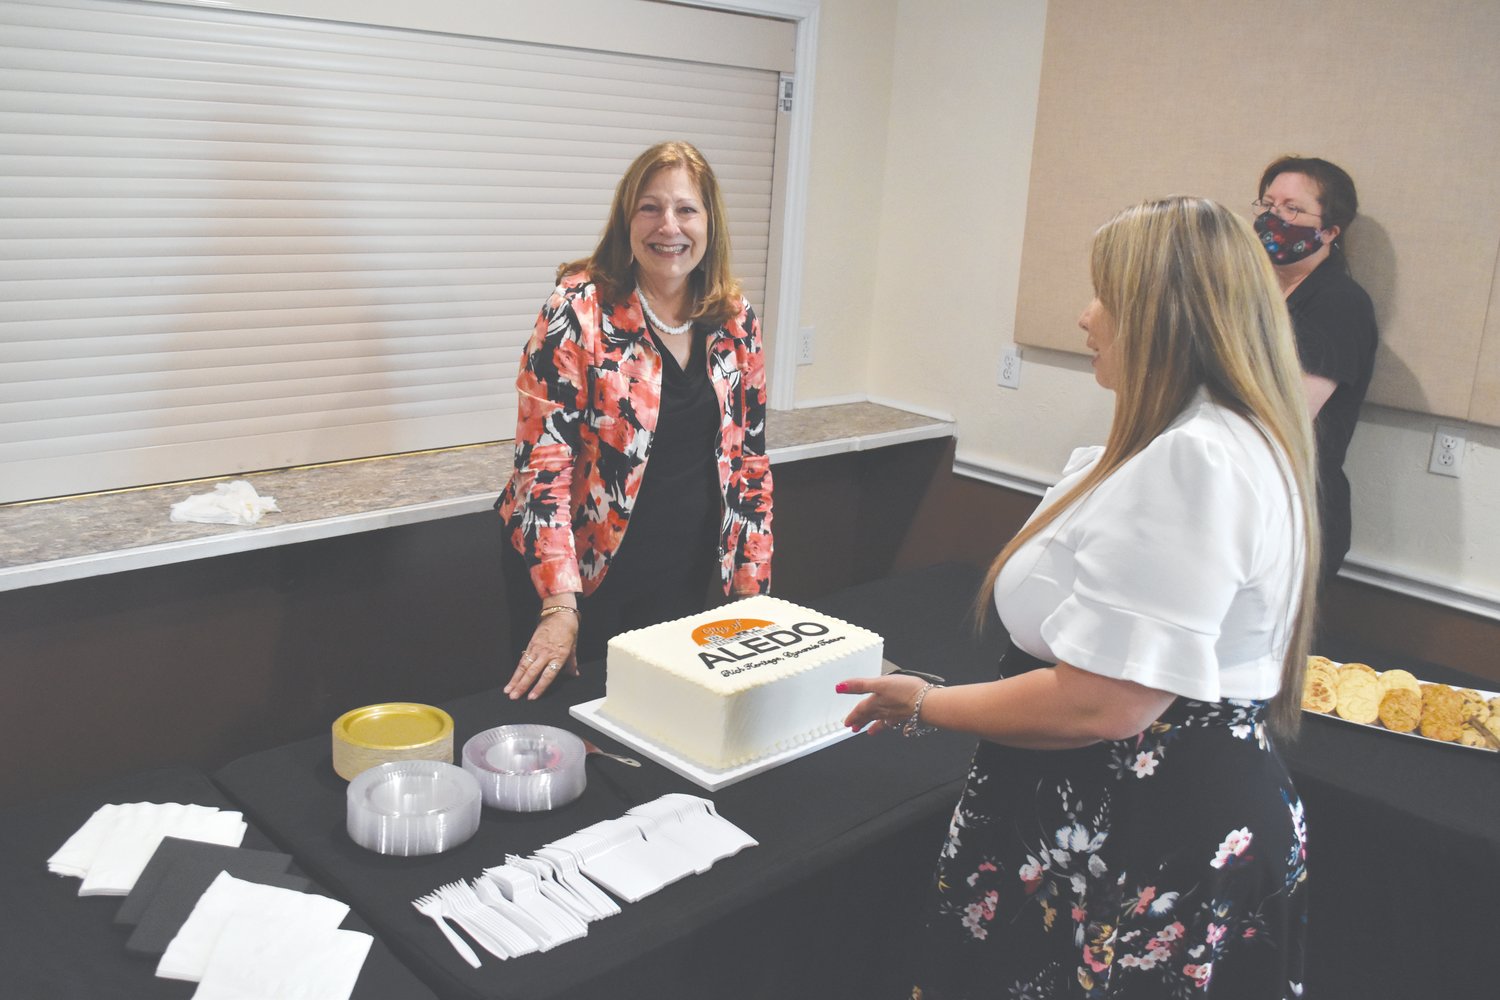 Kit Marshall is shown at the going away reception held on May 26 at the Aledo Community Center.